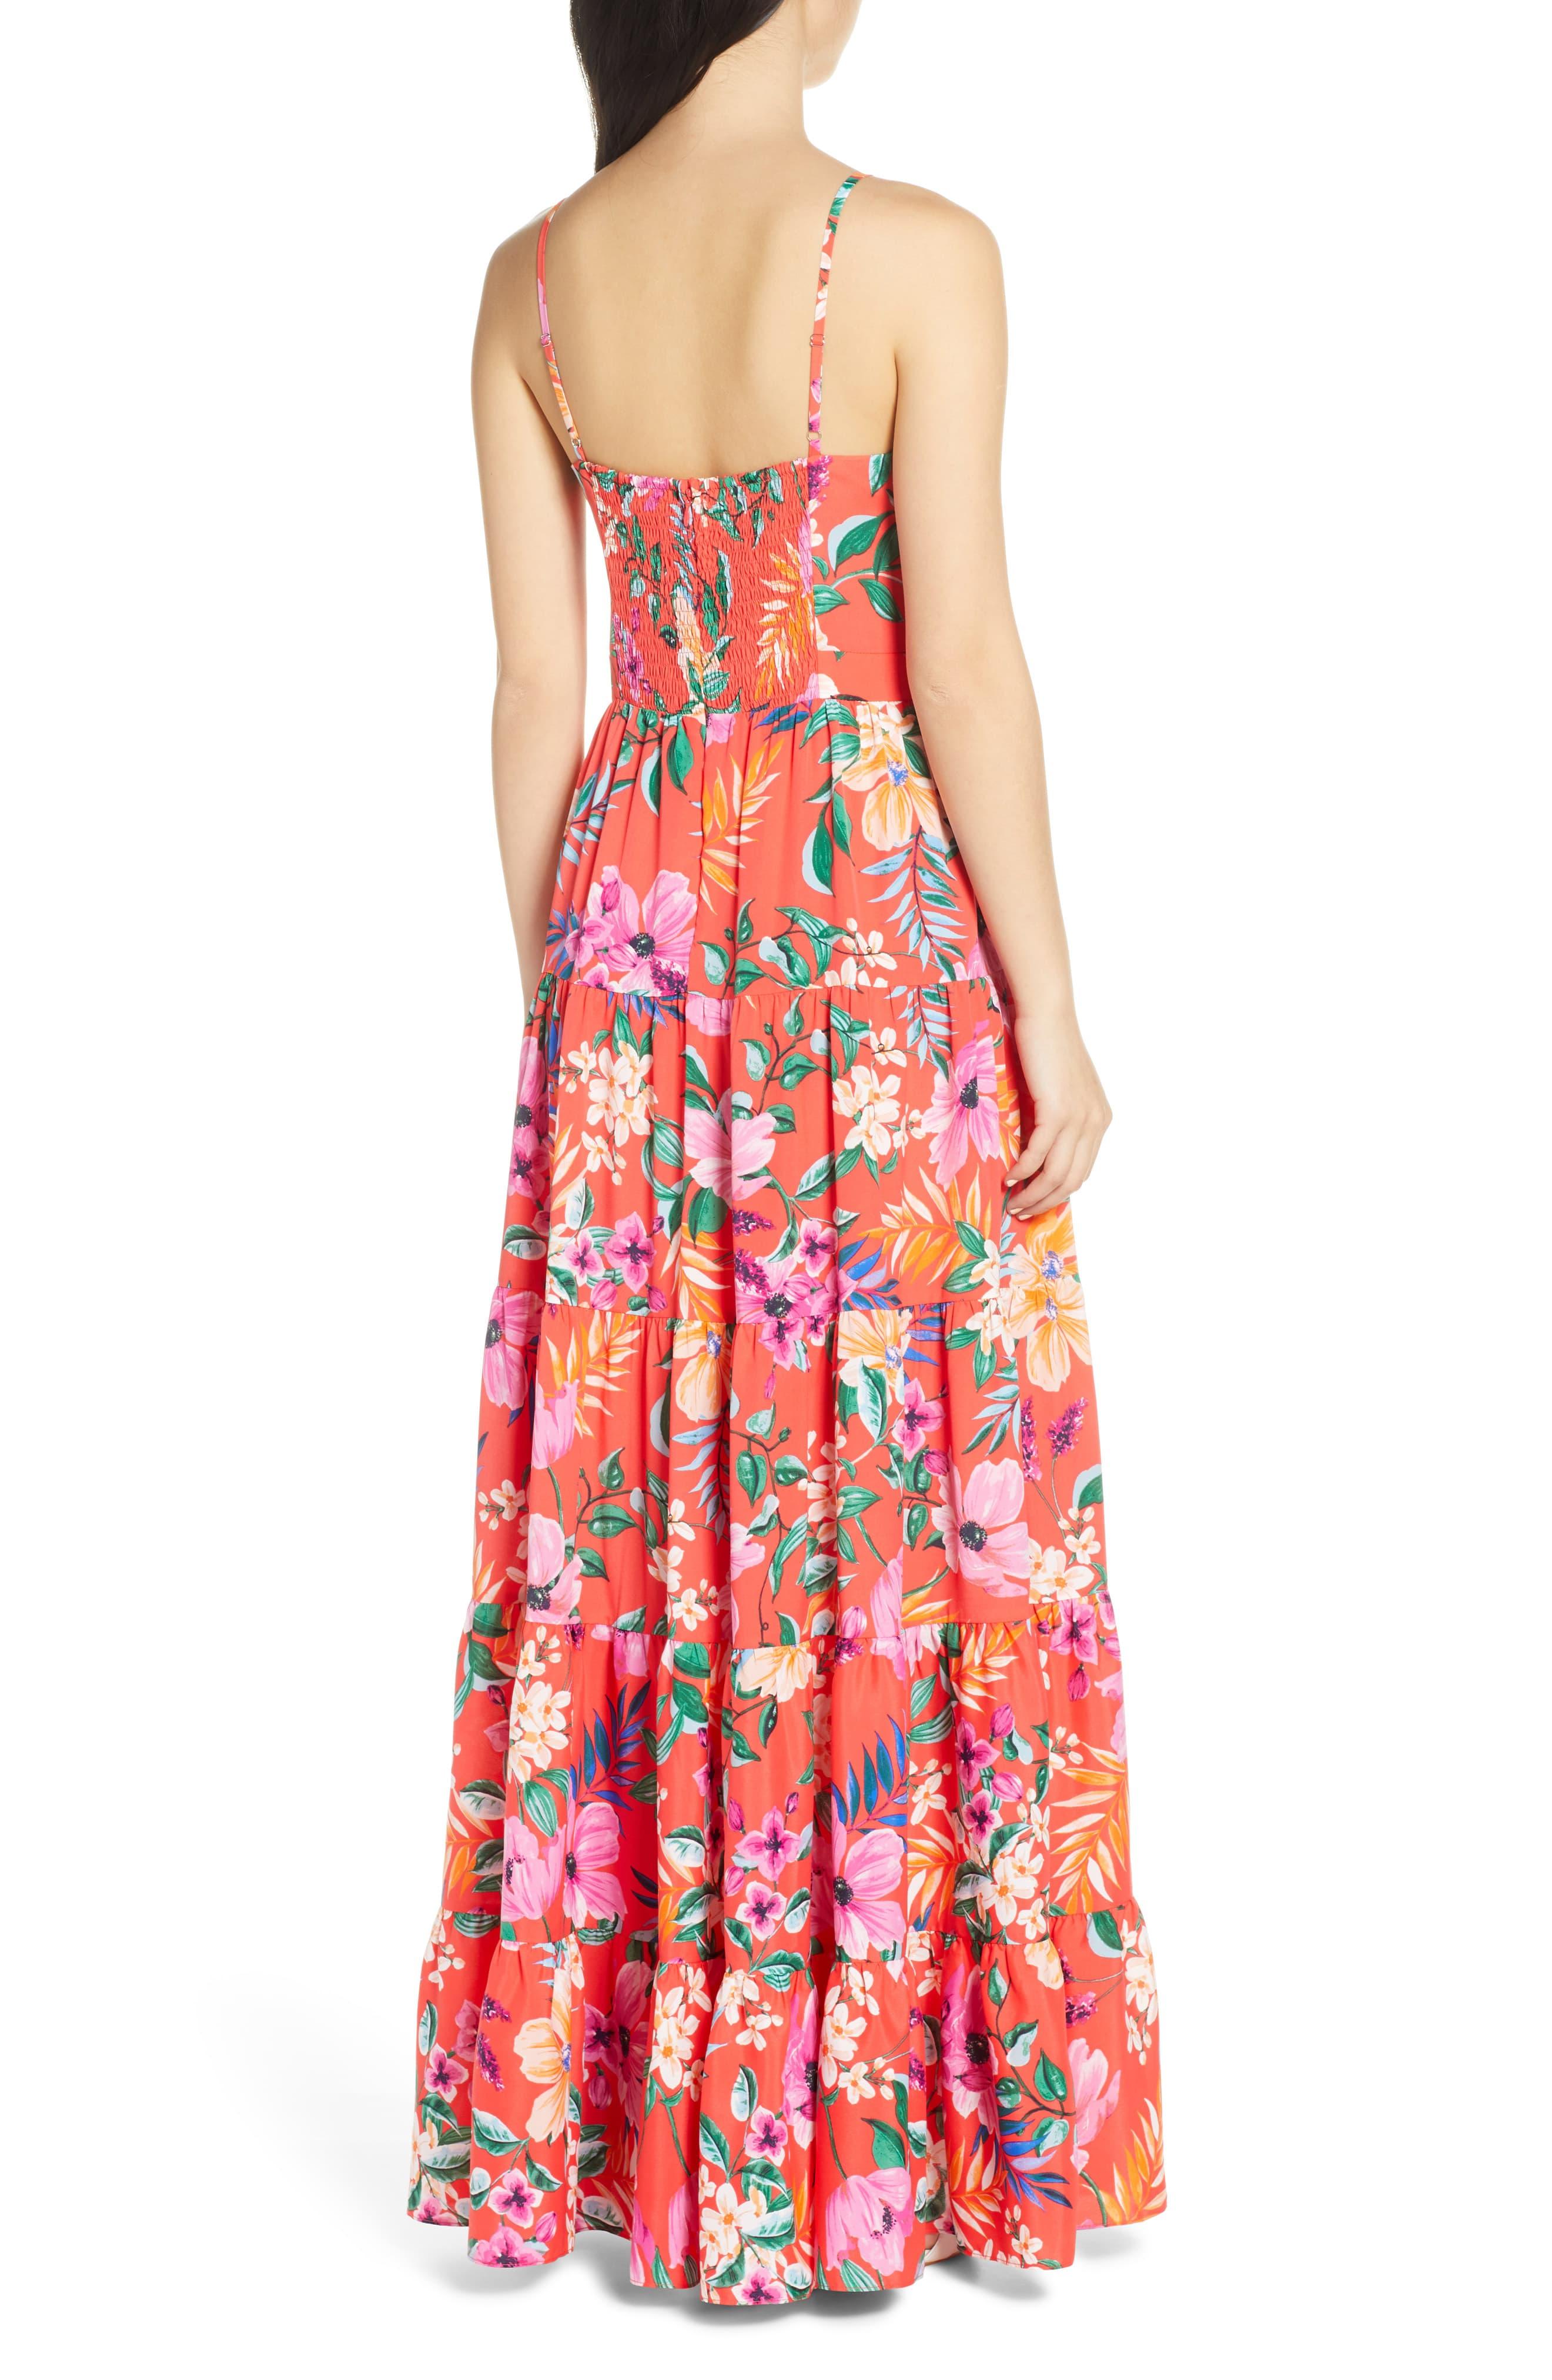 Eliza J Floral Tie Front Tiered Maxi Sundress in Red - Lyst